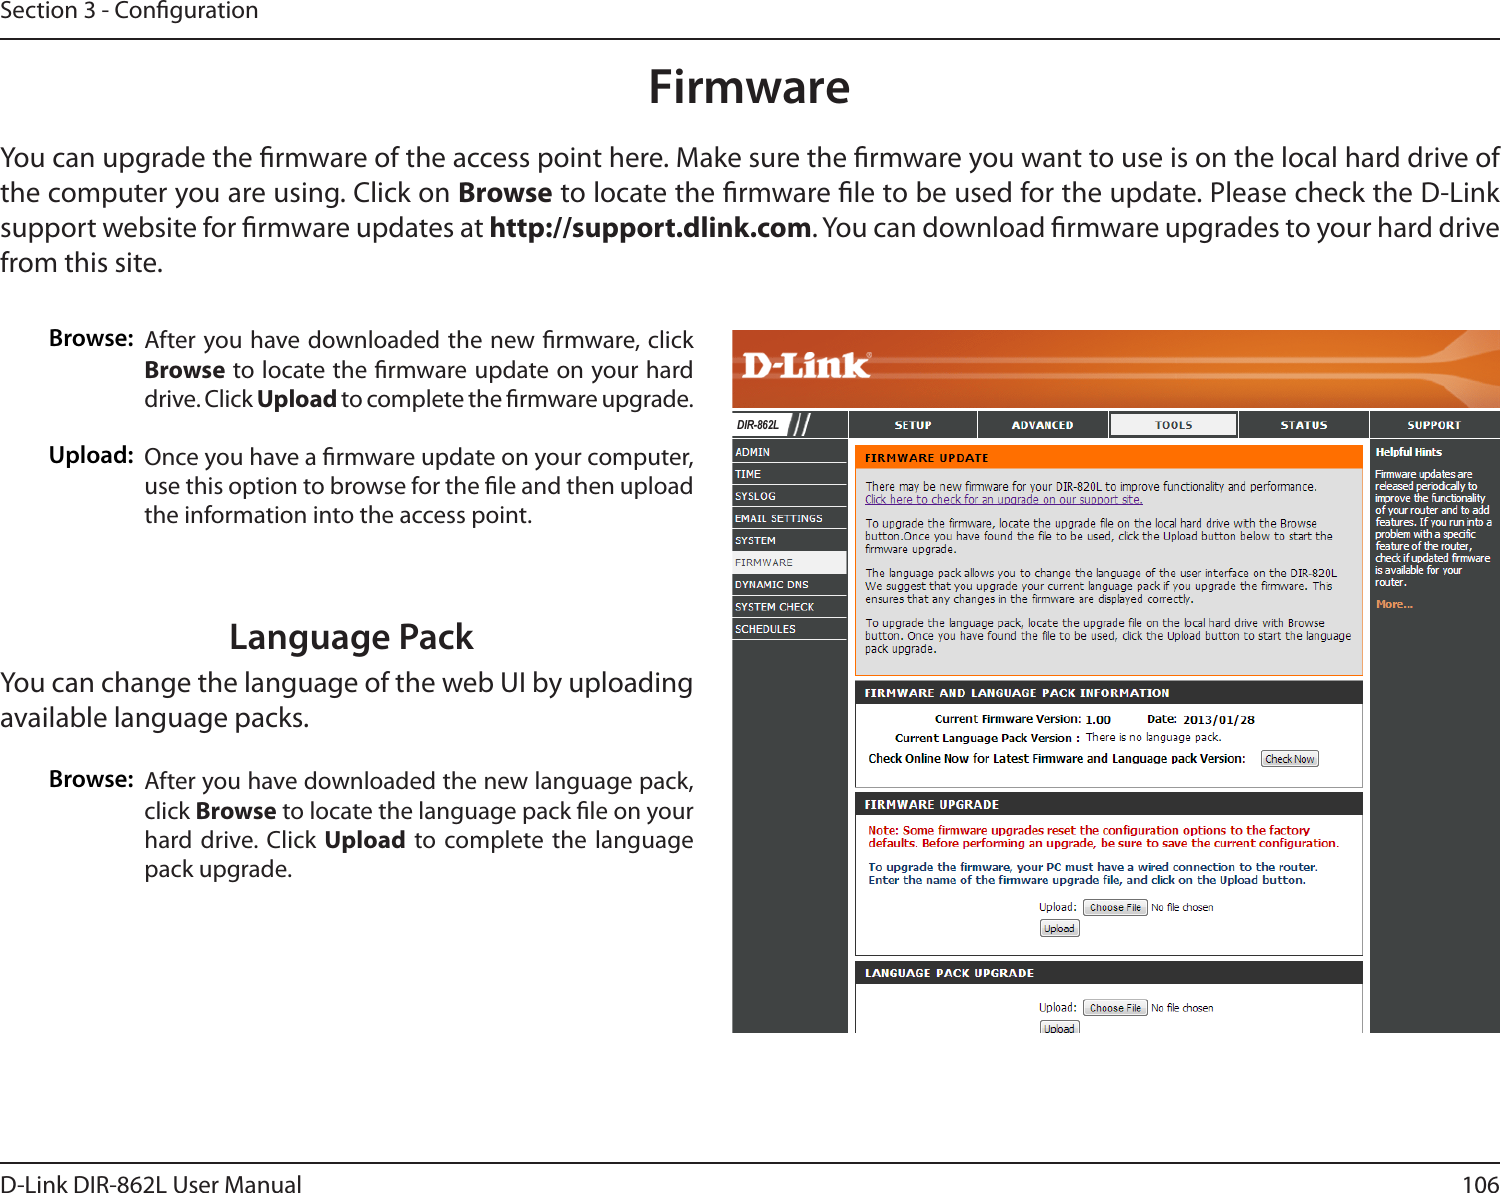 106D-Link DIR-862L User ManualSection 3 - CongurationFirmwareBrowse:Upload:After you have downloaded the new rmware, click Browse to locate the rmware update on your hard drive. Click Upload to complete the rmware upgrade.Once you have a rmware update on your computer, use this option to browse for the le and then upload the information into the access point. You can upgrade the rmware of the access point here. Make sure the rmware you want to use is on the local hard drive of the computer you are using. Click on Browse to locate the rmware le to be used for the update. Please check the D-Link support website for rmware updates at http://support.dlink.com. You can download rmware upgrades to your hard drive from this site.After you have downloaded the new language pack, click Browse to locate the language pack le on your hard drive. Click Upload to complete the language pack upgrade.Language PackYou can change the language of the web UI by uploading available language packs.Browse:DIR-862L